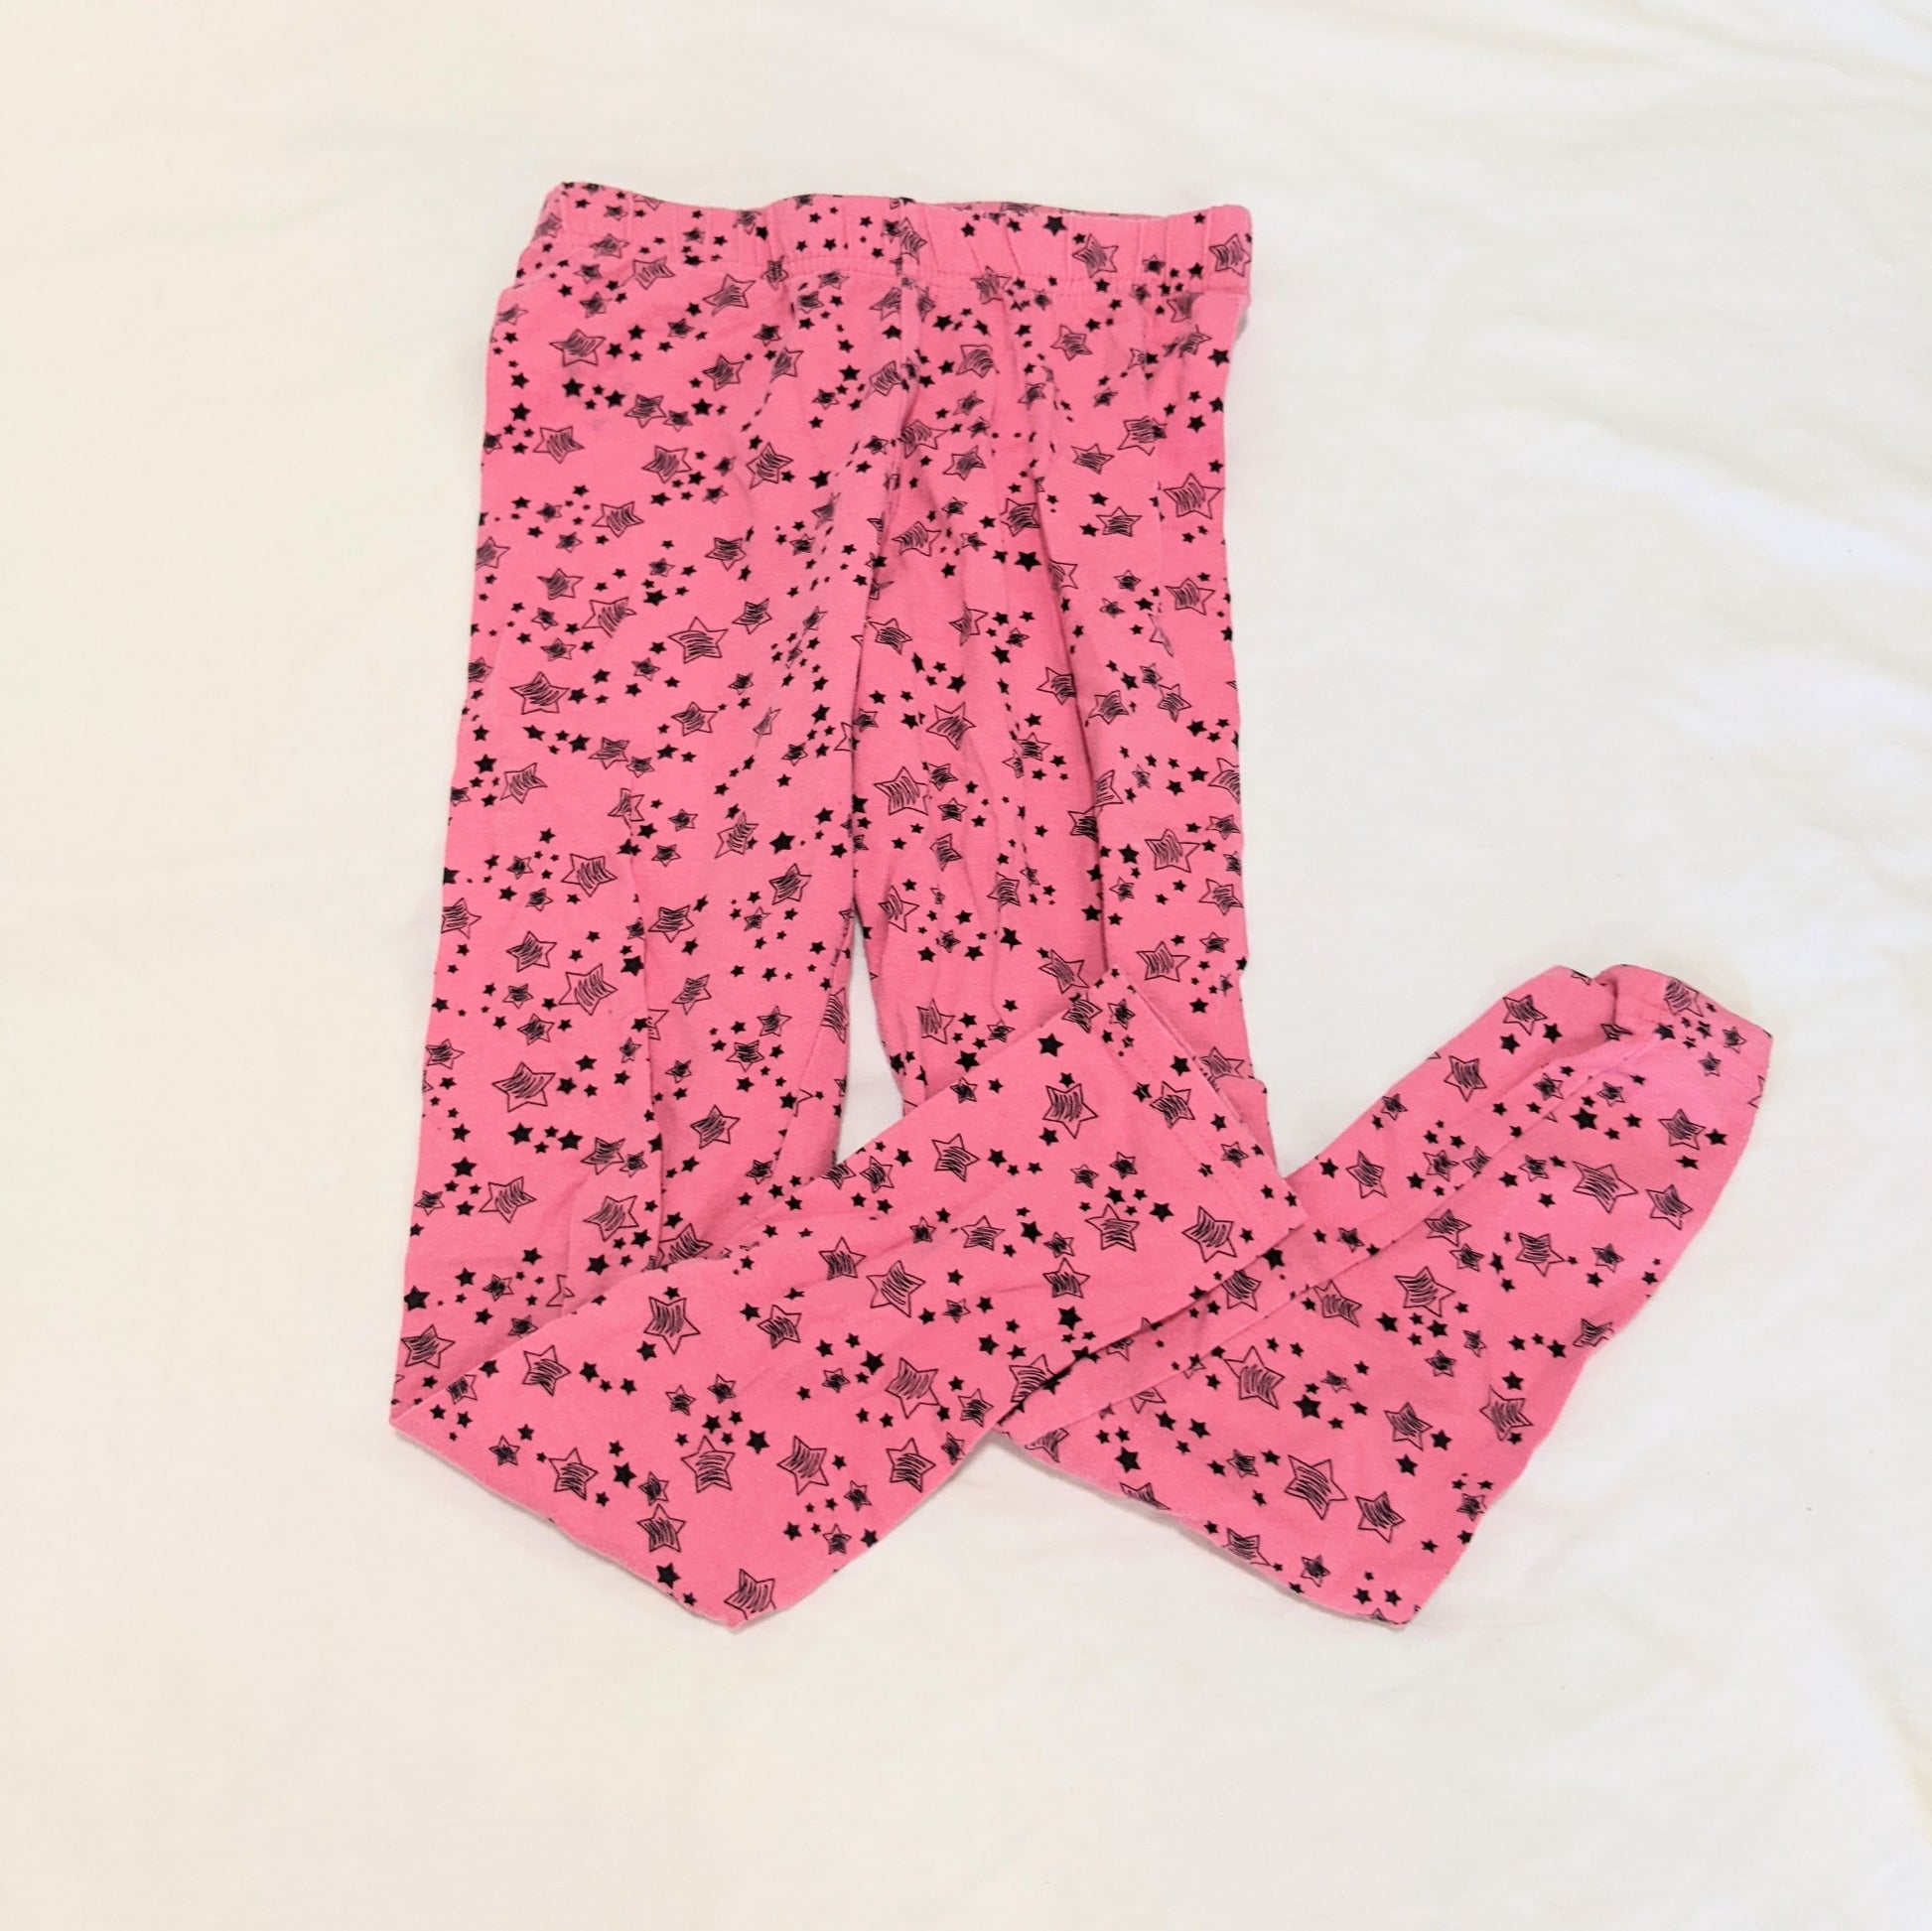 Pink starry tights - size 8